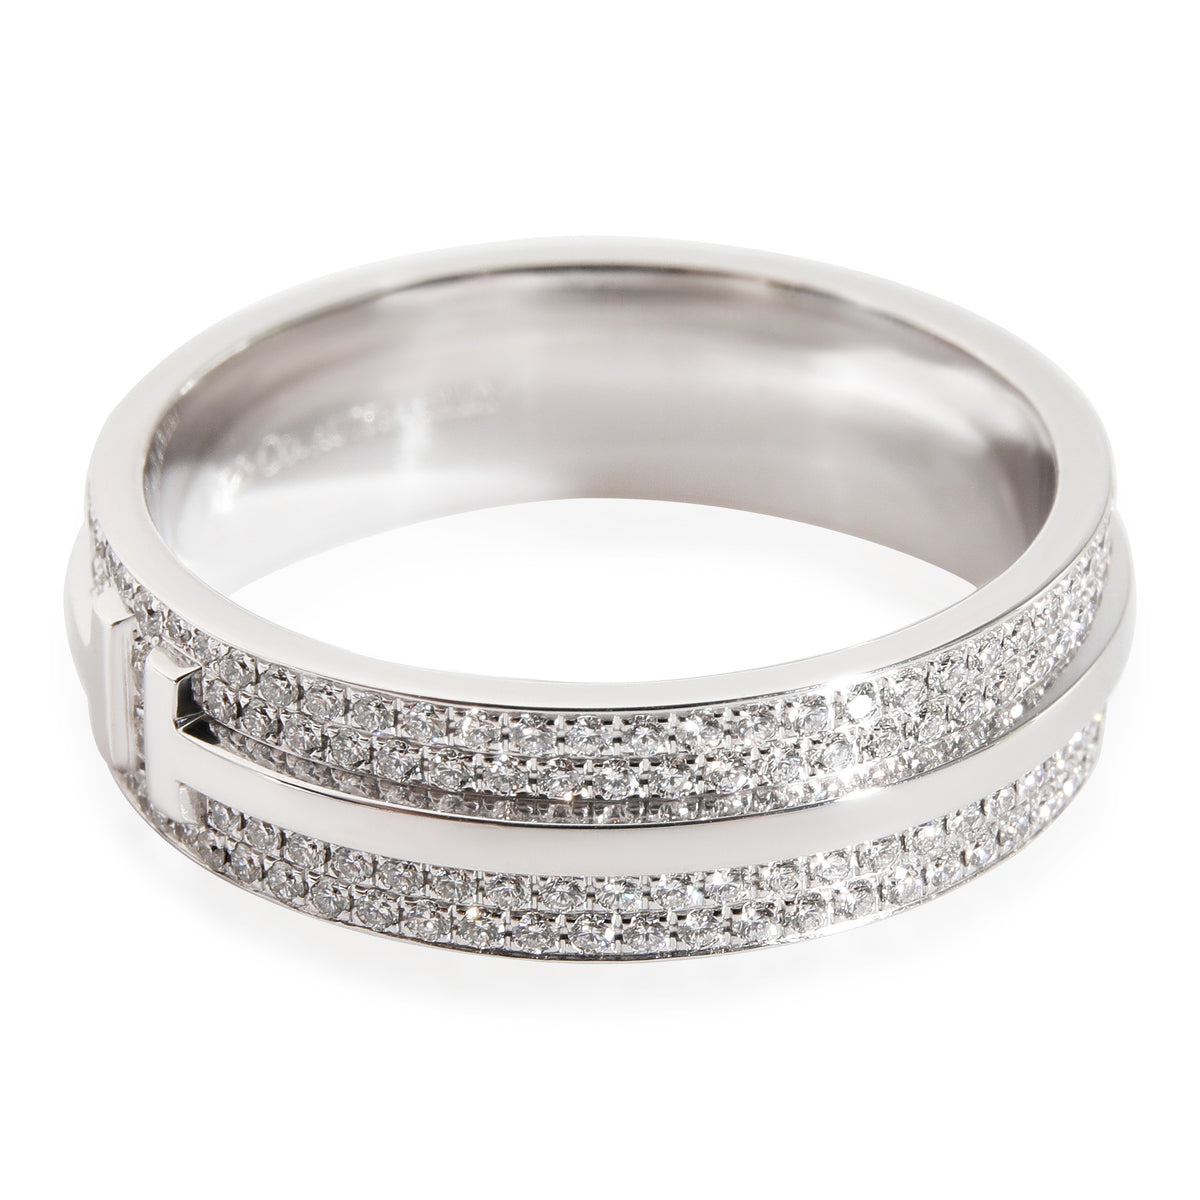 T Wide Pave Diamond Ring in 18K White Gold  0.63 Ctw